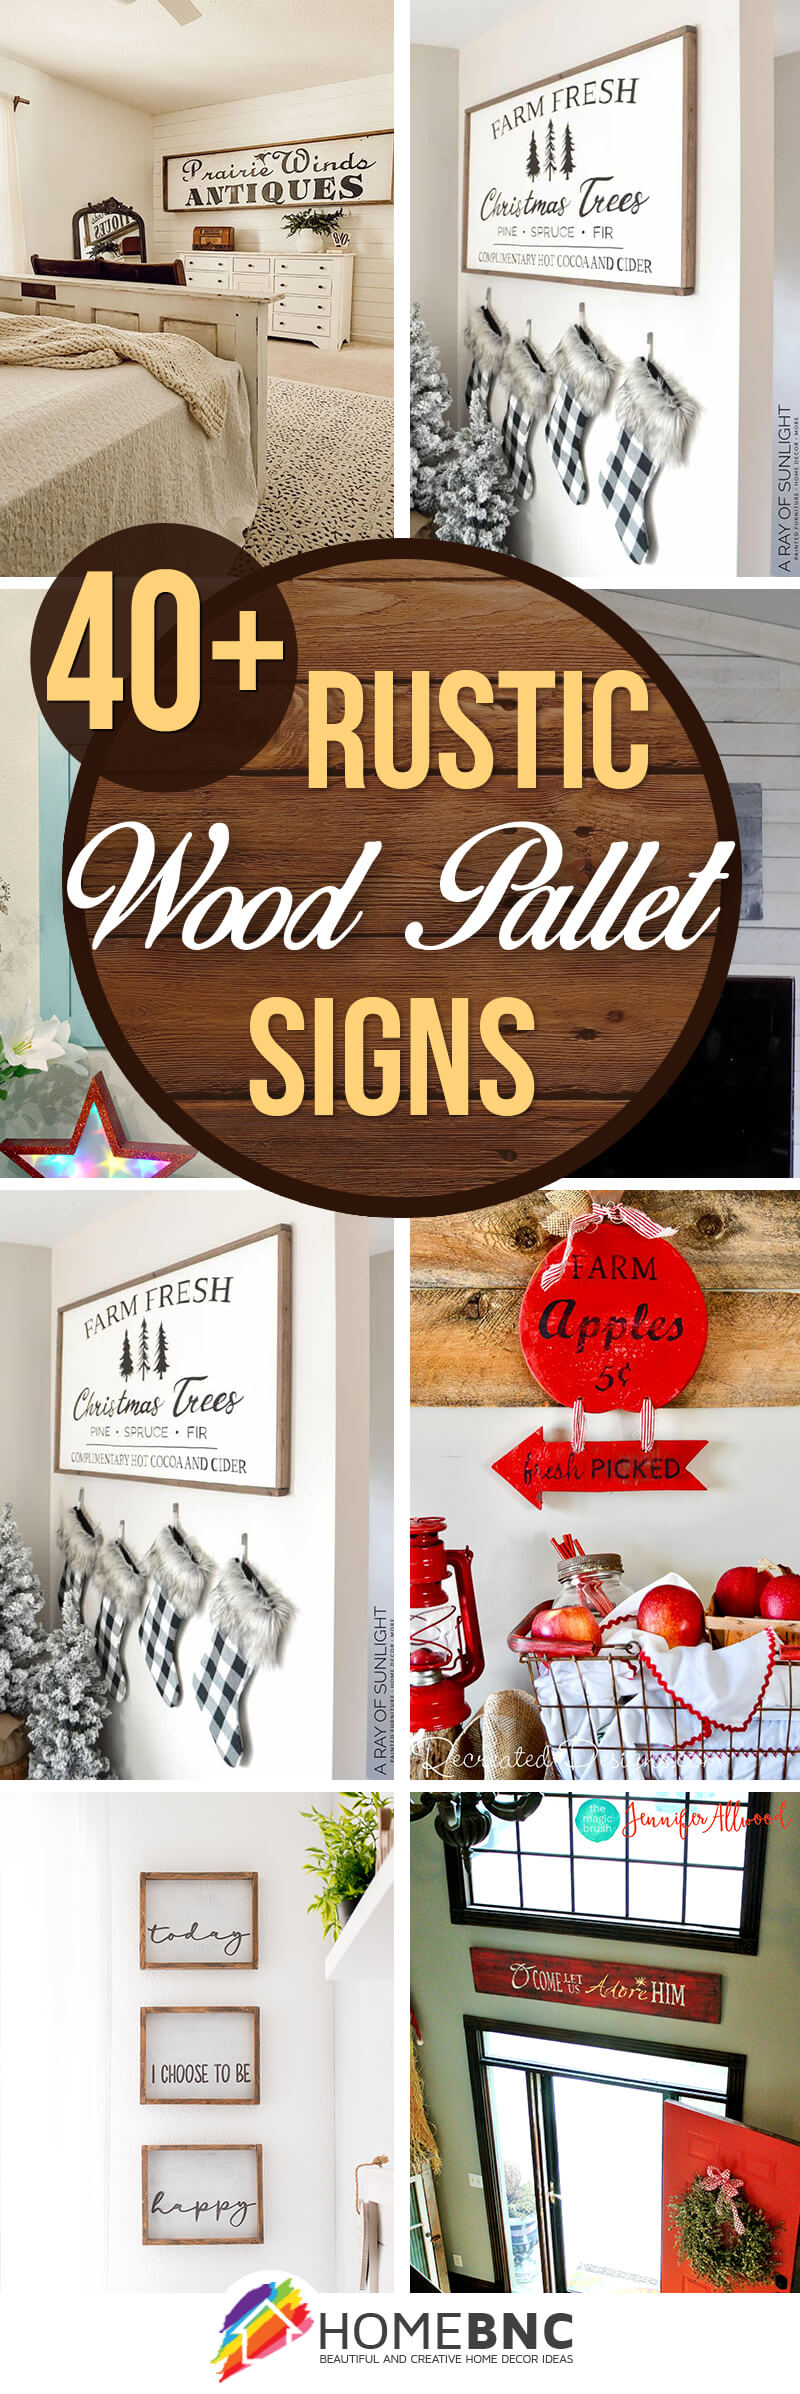 Wood Signs Ideas And Decorations, How To Make Your Own Home Decor Signs